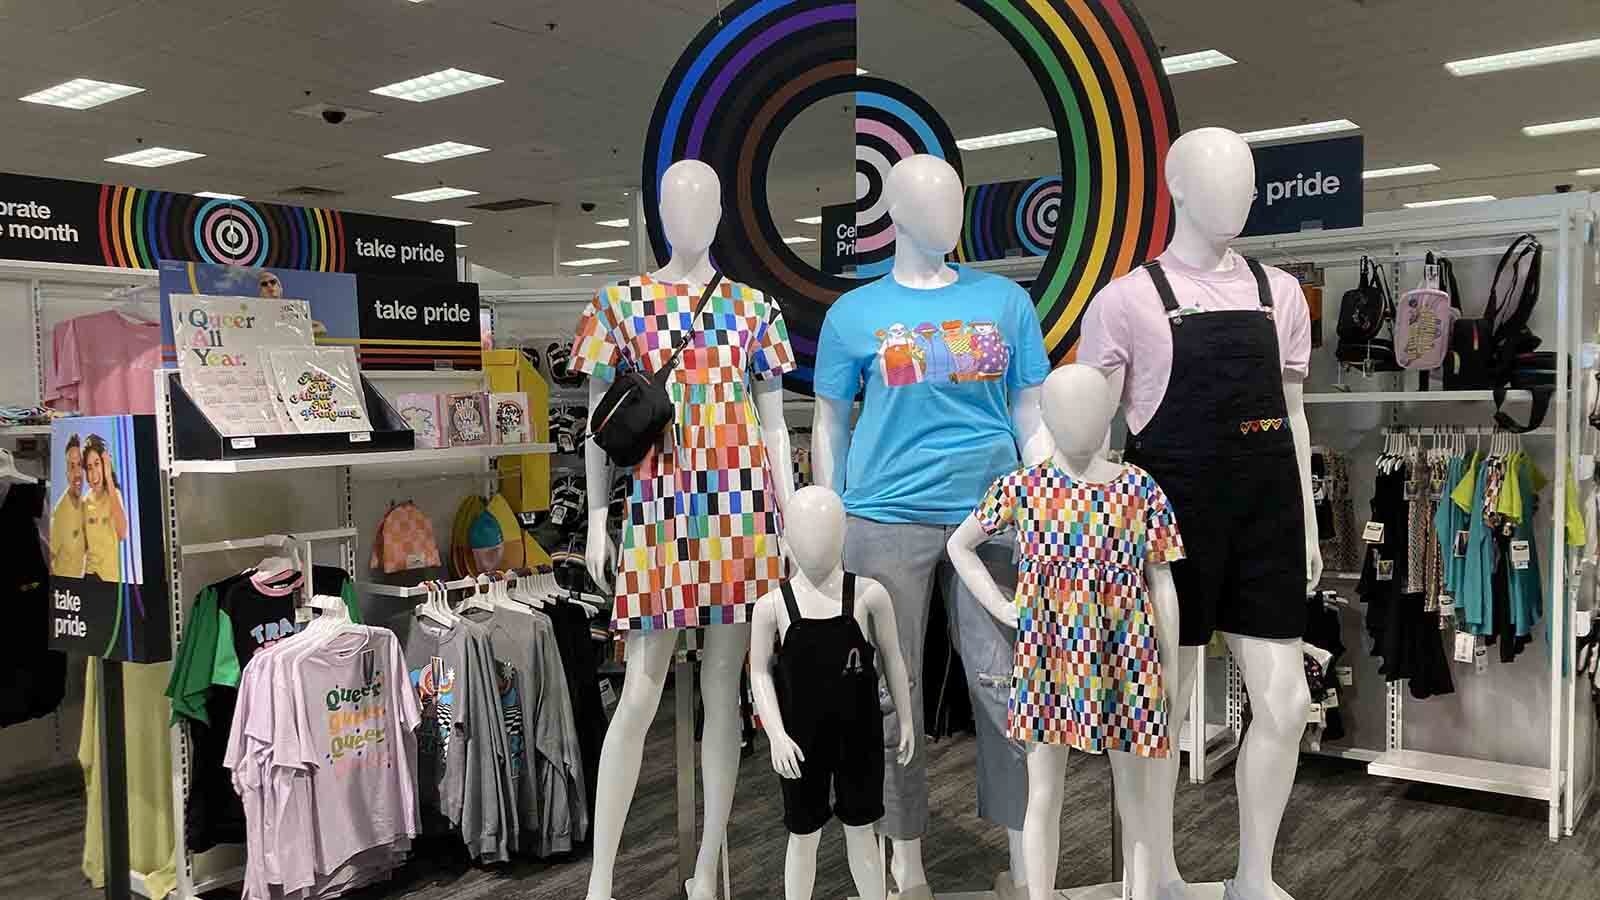 Target Loses $9B Amid Controversy Over LGBT Children's Clothes